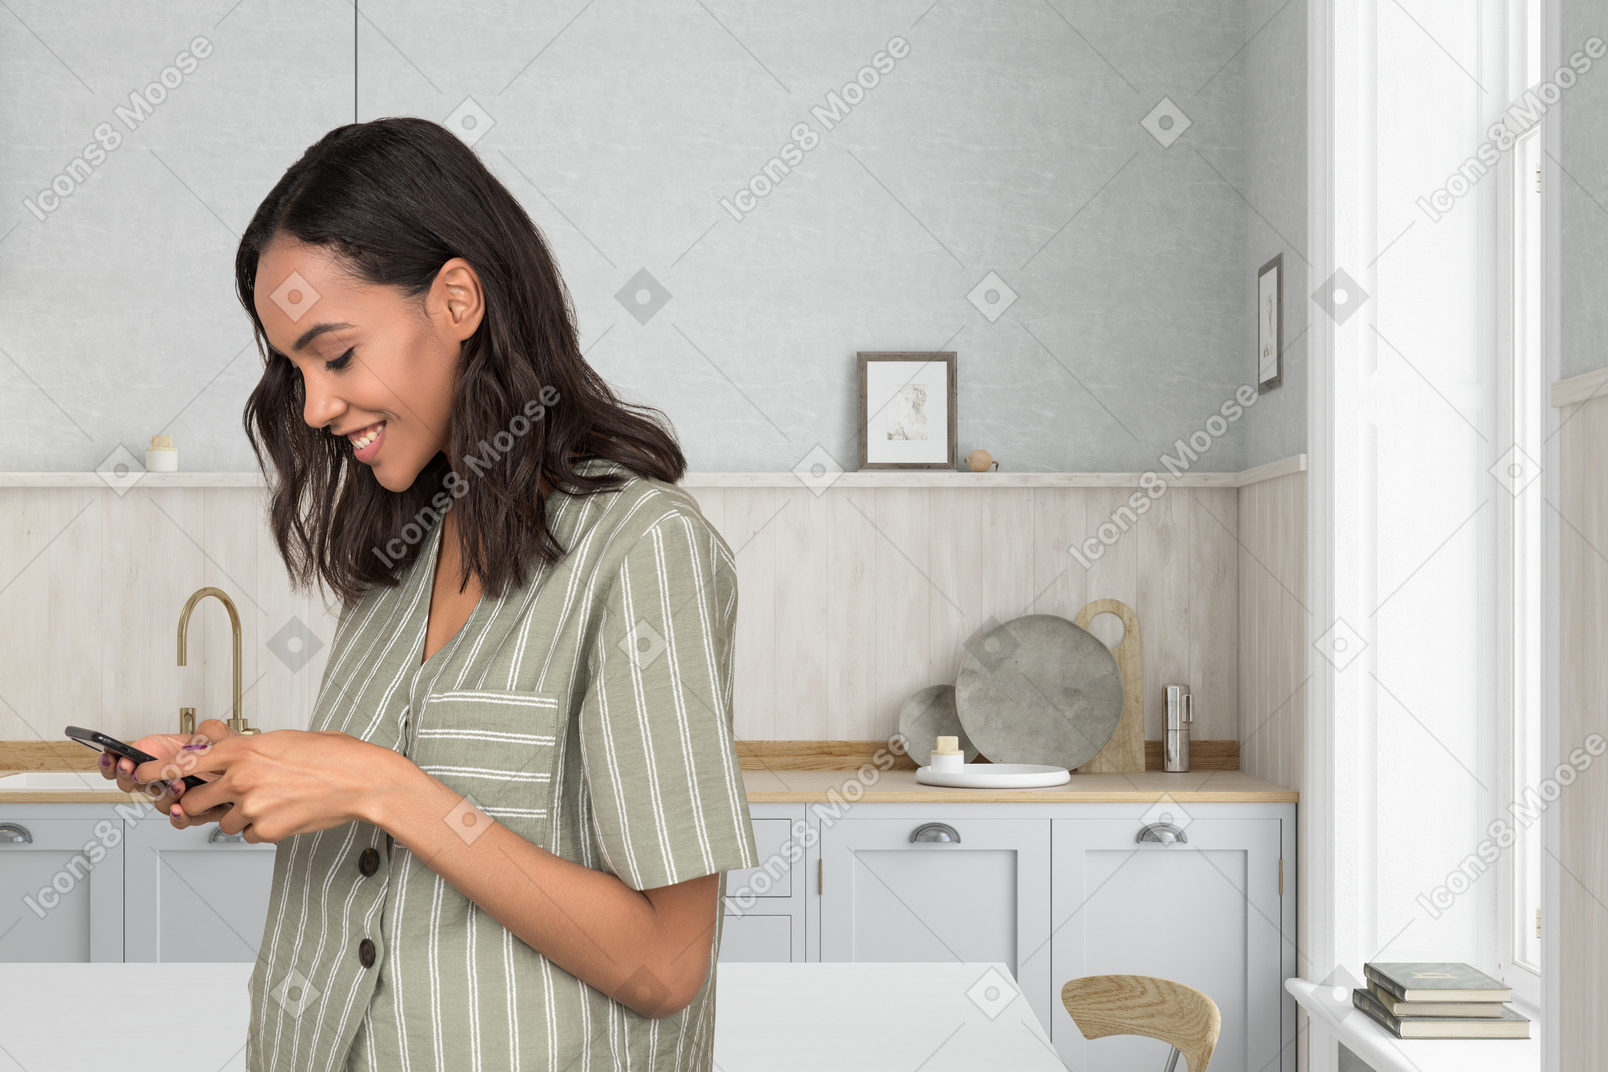 A woman standing in a kitchen looking at her phone